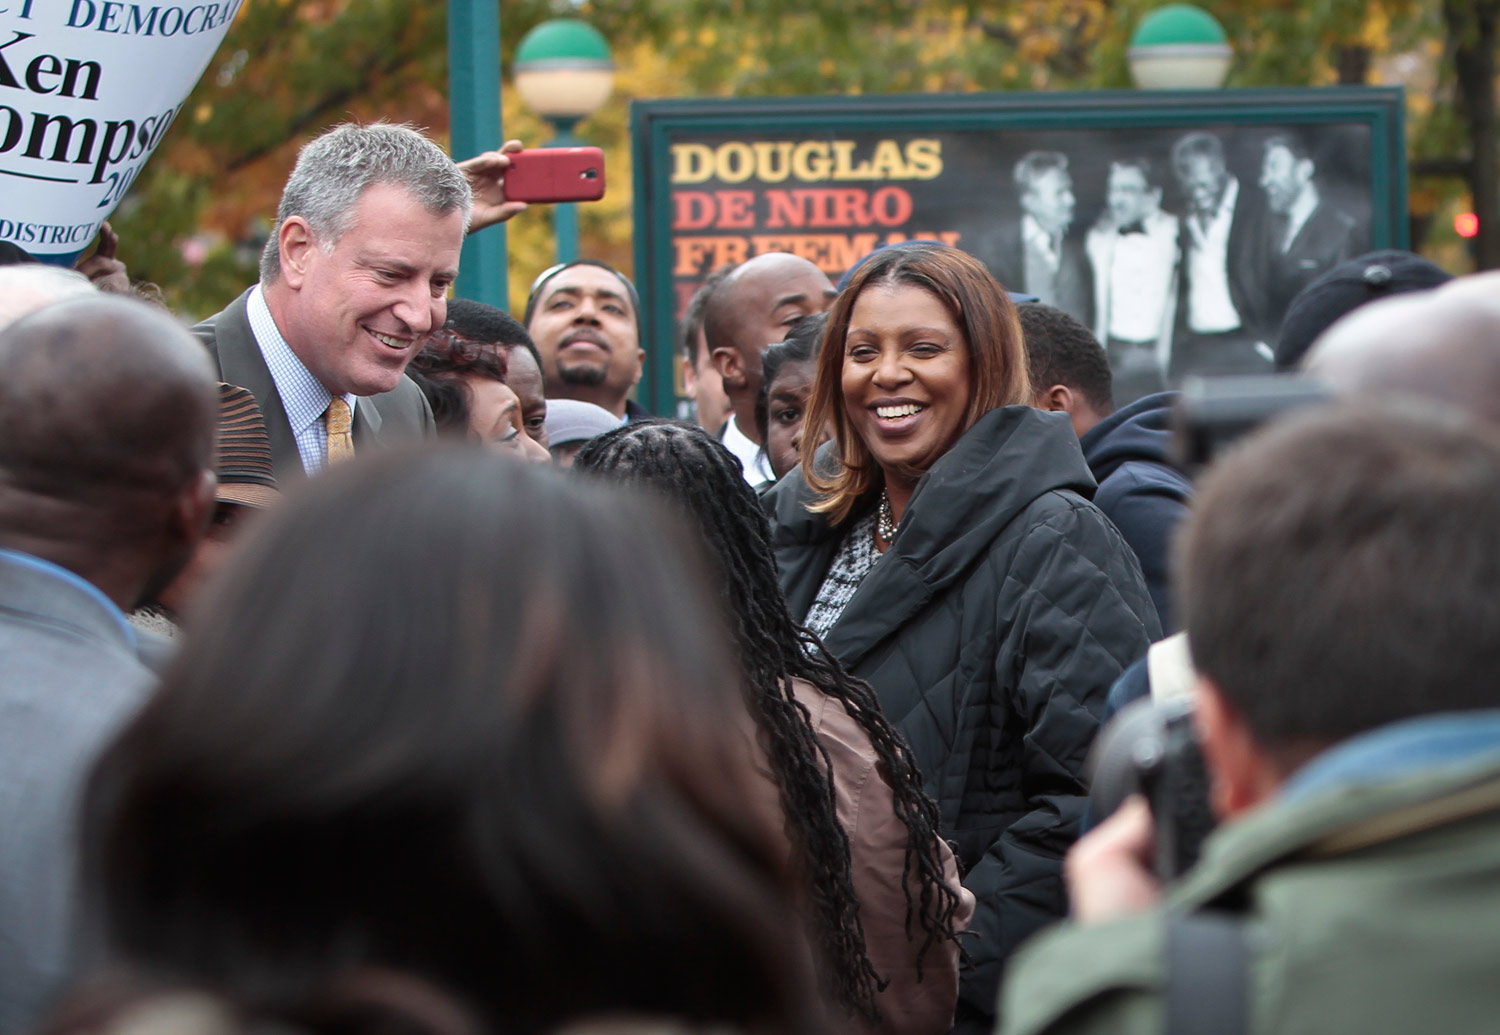 7 Questions for Tish James